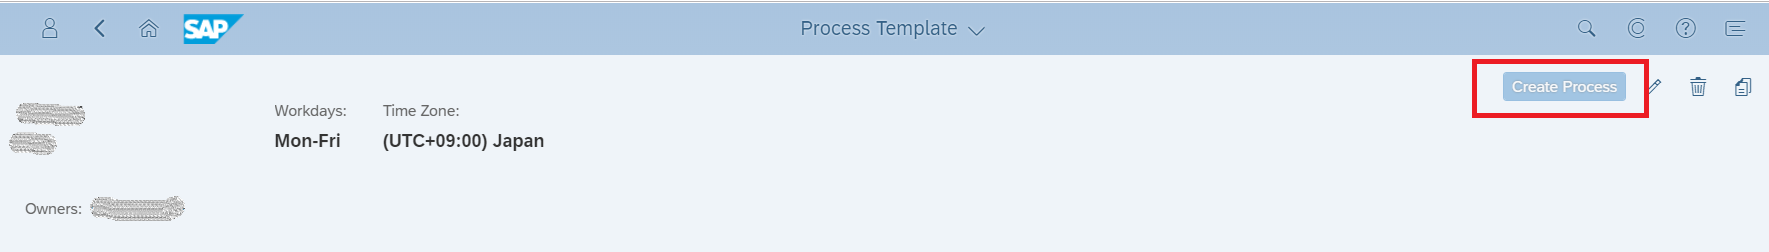 Manage Process Template.PNG